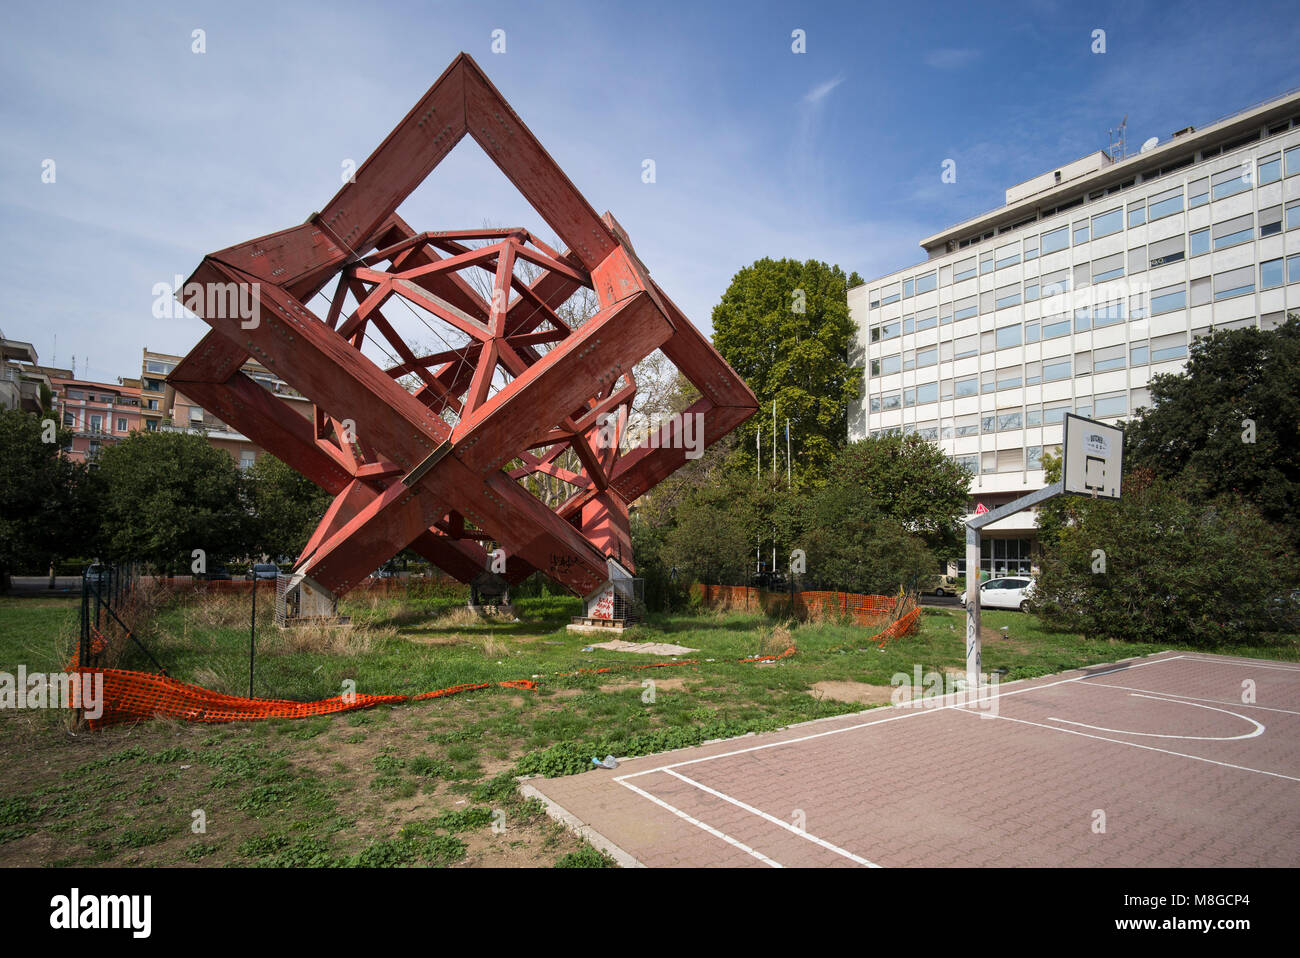 Rome. Italy. Goal - Italia 90, sculpture/installation (1990), by Mario Ceroli, made for the occasion of the 1990 FIFA World Cup.  The installation was Stock Photo